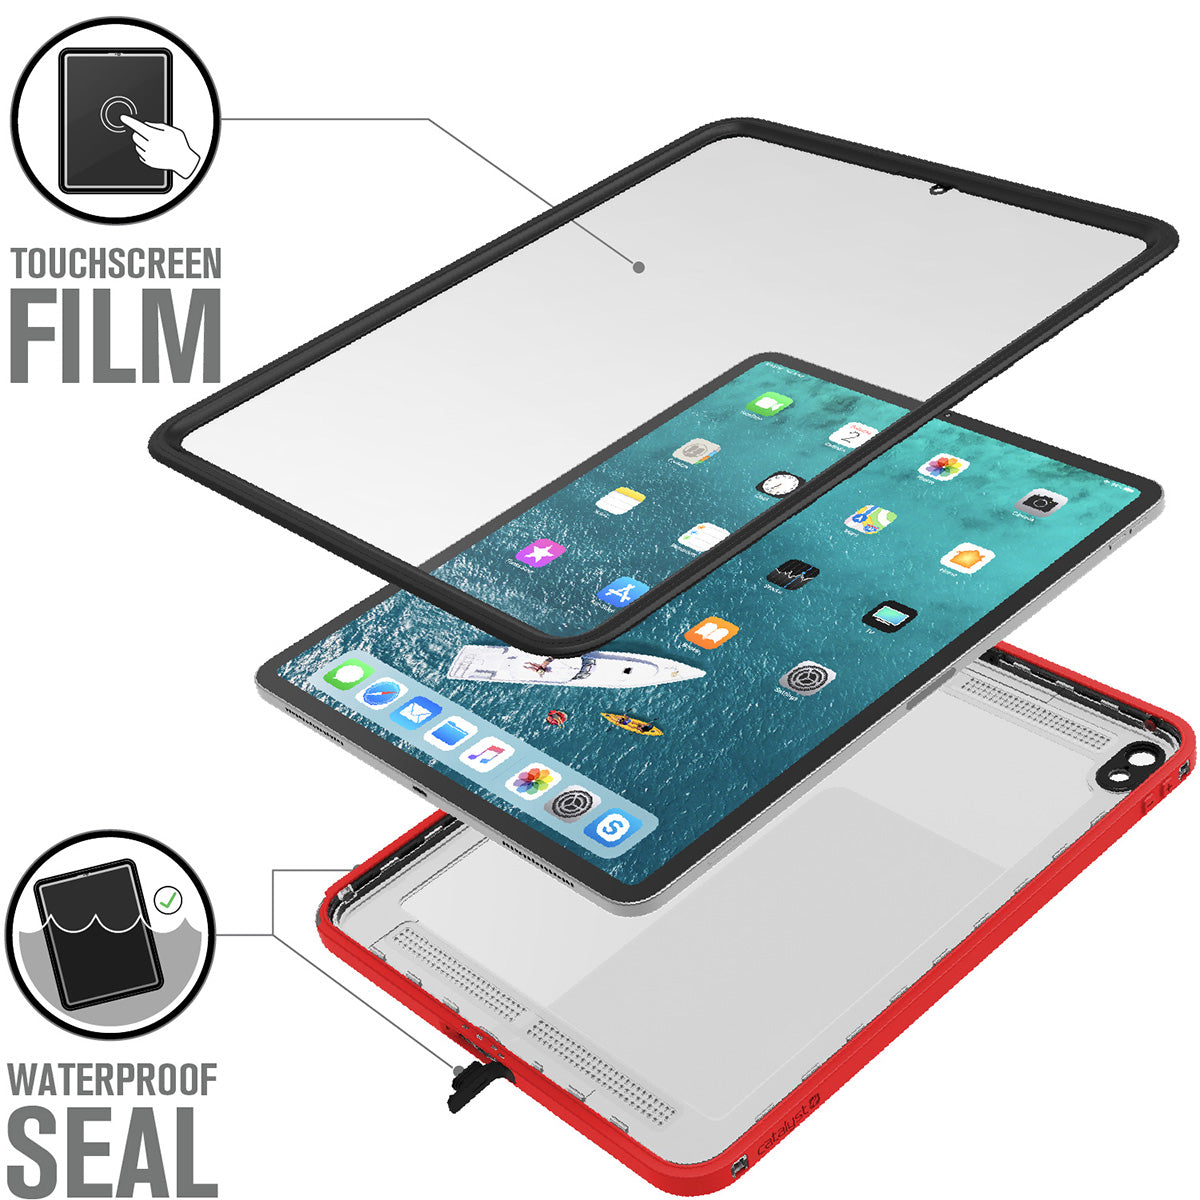 Catalyst waterproof case for ipad pro gen 3 12.9in red front and back protectionText reads touchscreen film waterproof seal 